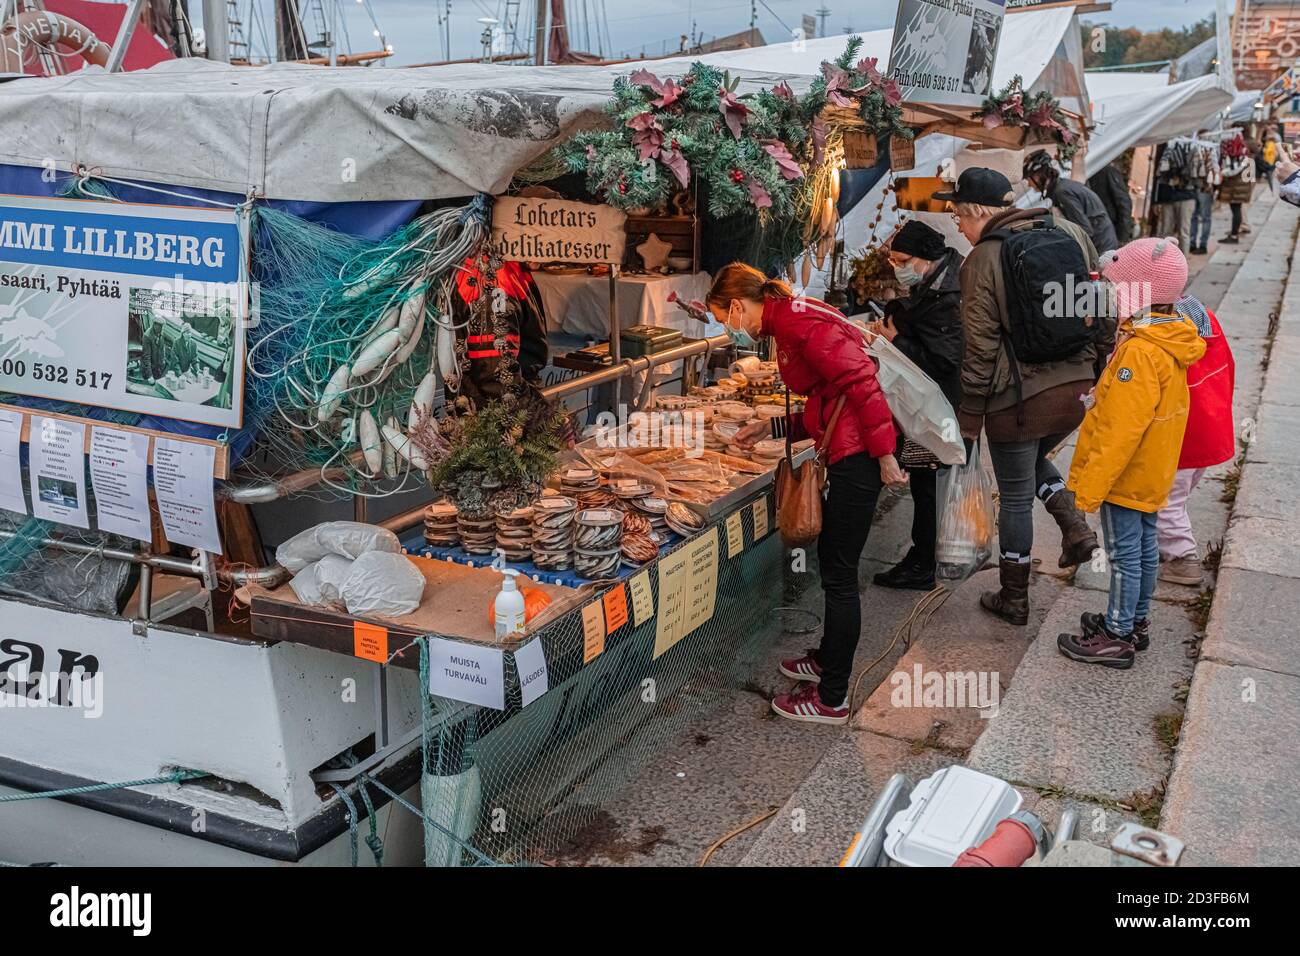 Helsinki, Uusimaa, Finland October 7, 2020 Market square, autumn, traditional fair. People buy fish delicacies. High quality photo Stock Photo